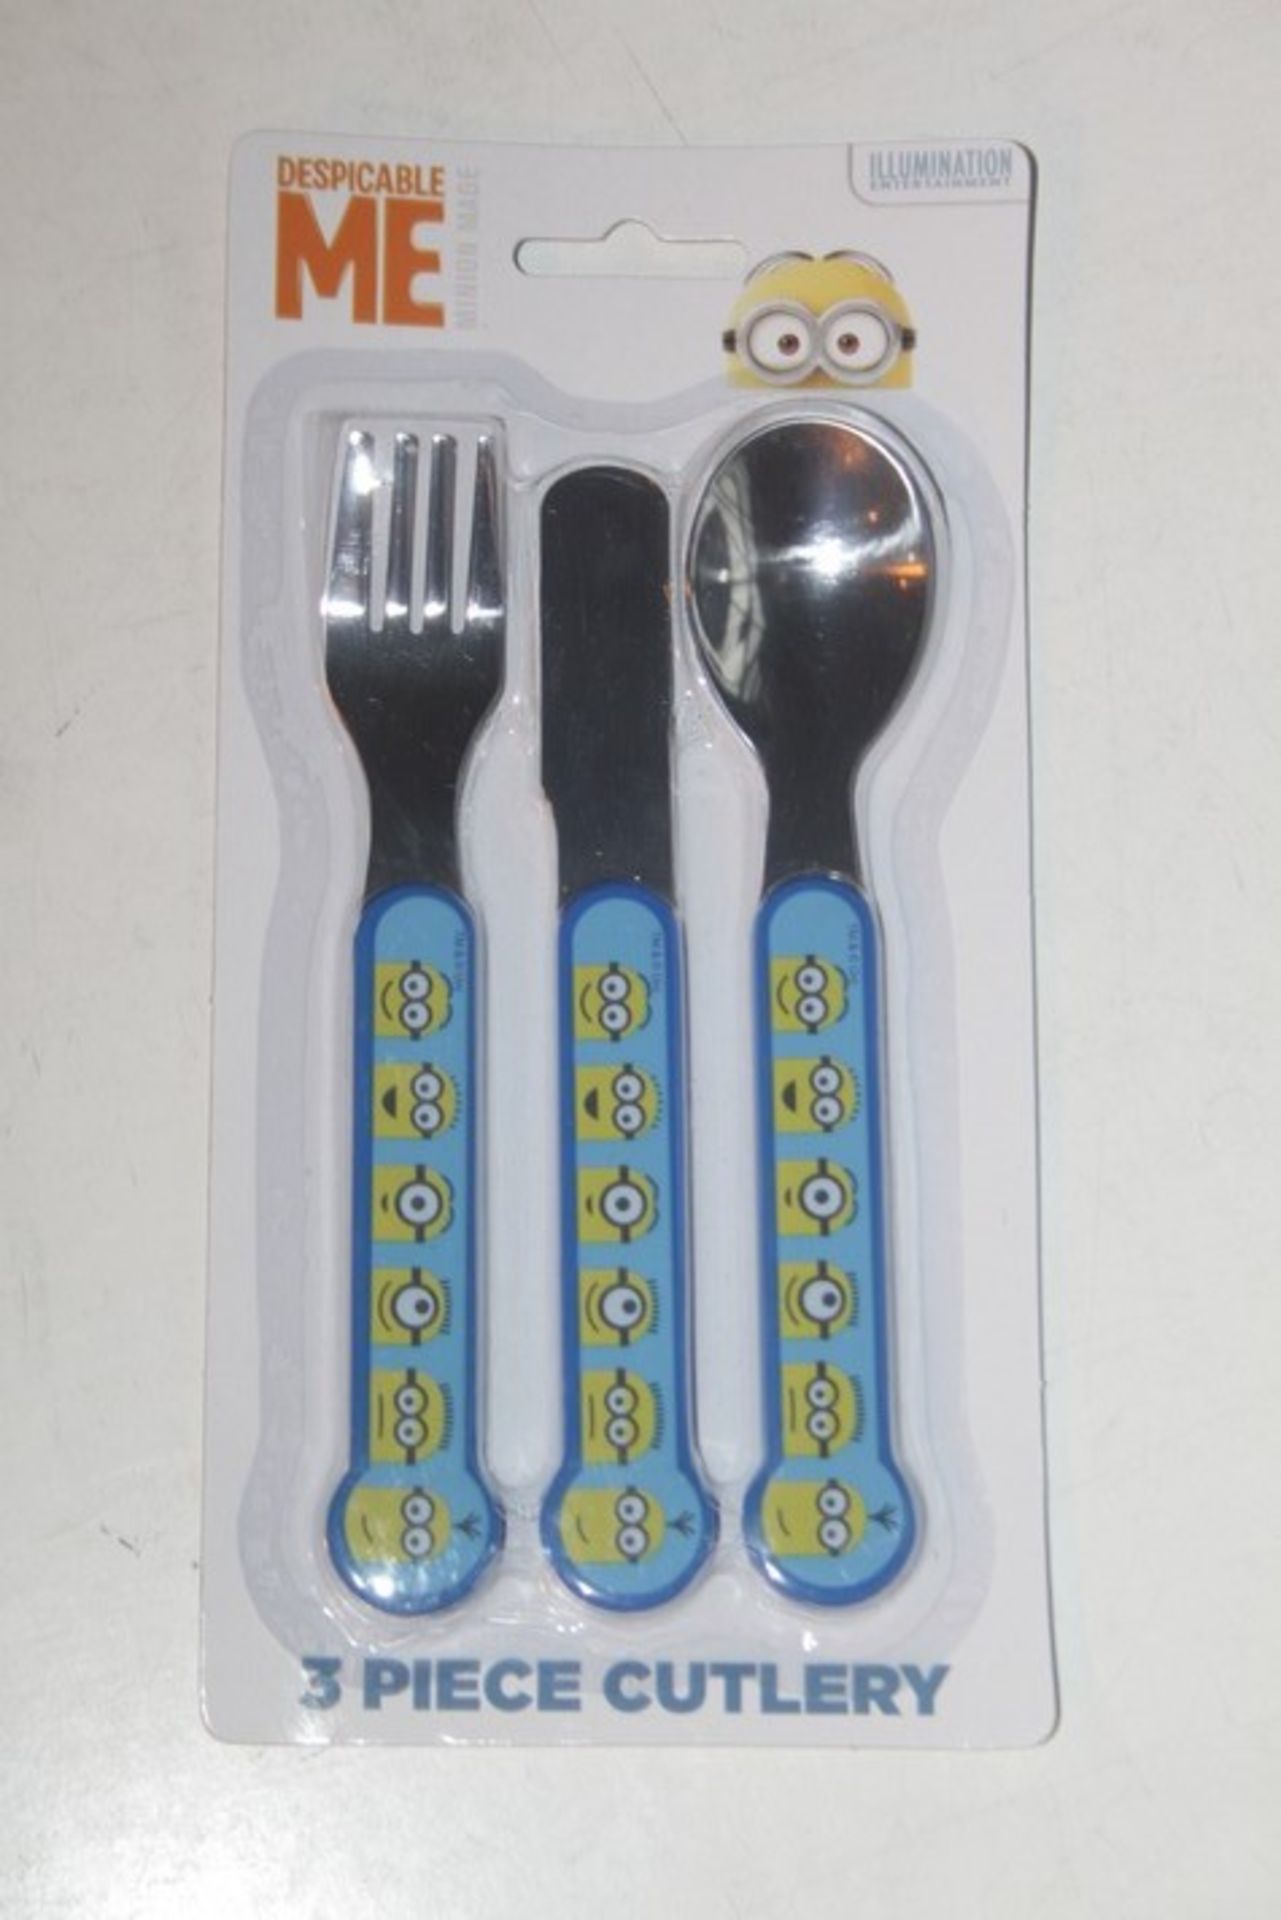 ONE LOT TO CONTAIN 10X BOXES TO CONTAIN 6X BRAND NEW DESPICABLE ME CUTLERY SETS (THERE ARE TEN BOXES